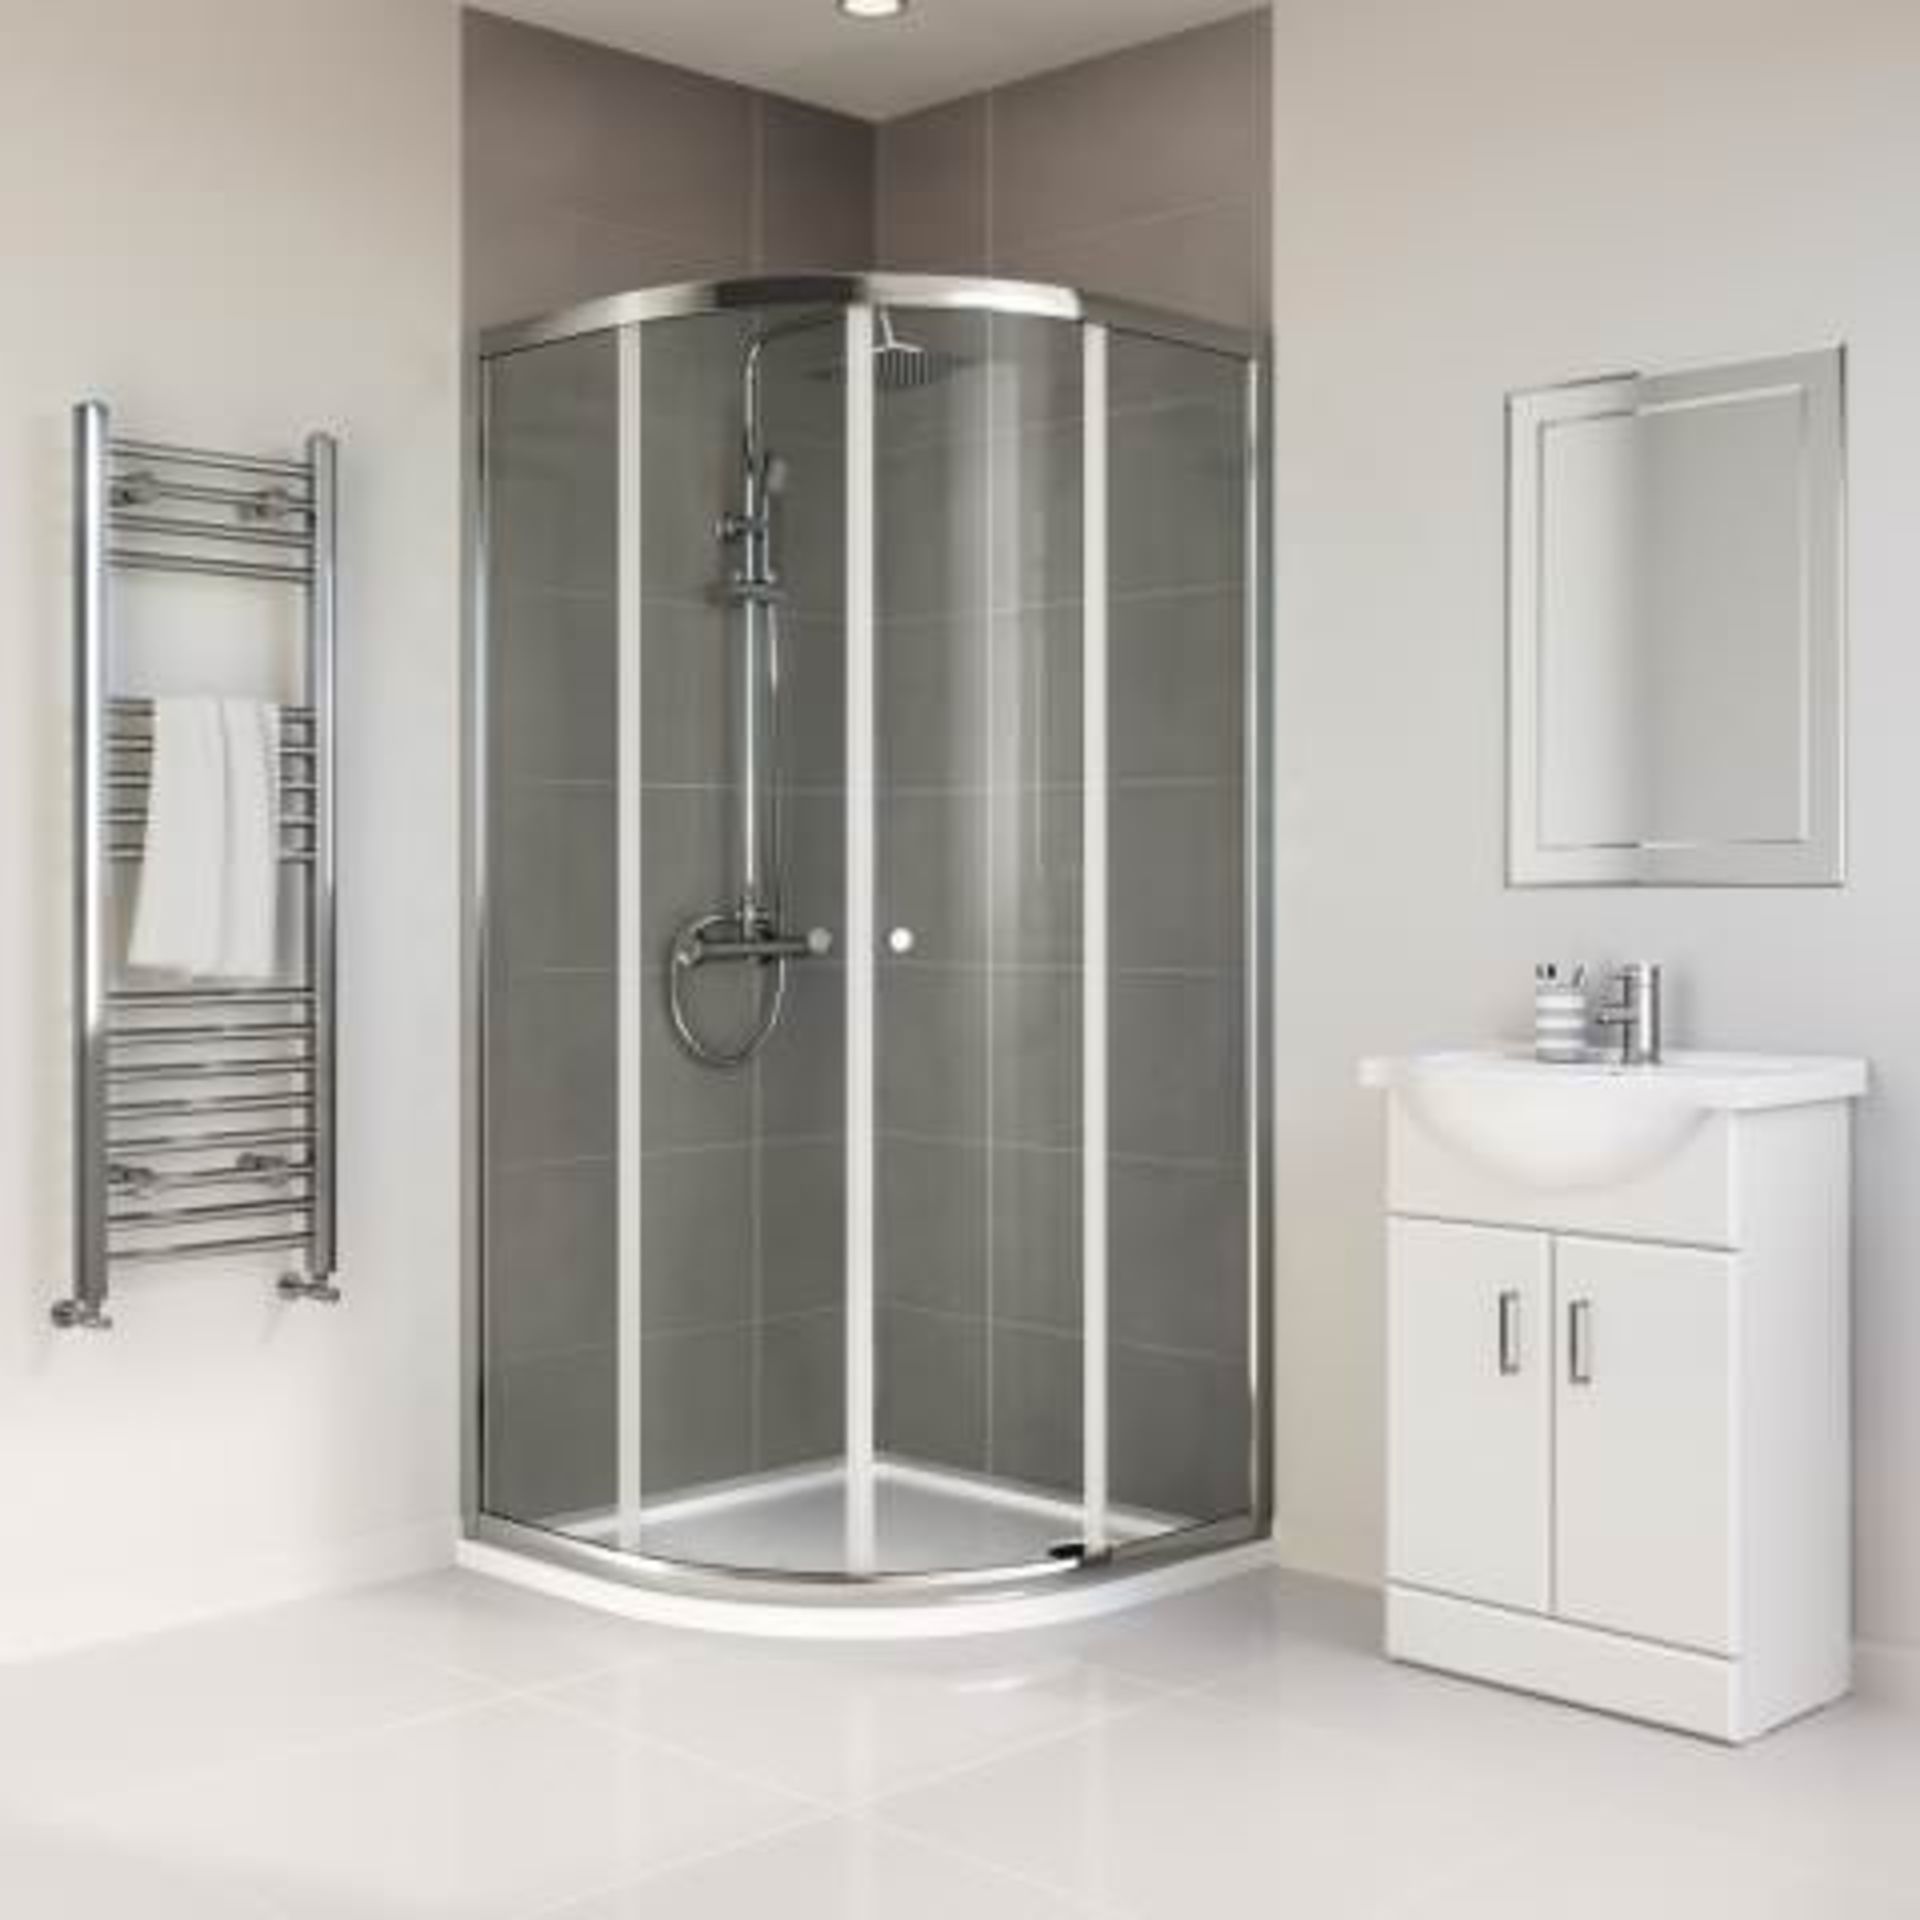 NEW (NS102) 900x900mm - Elements Quadrant Shower Enclosure. RRP £429.99. Budget Solution Our e... - Image 3 of 3